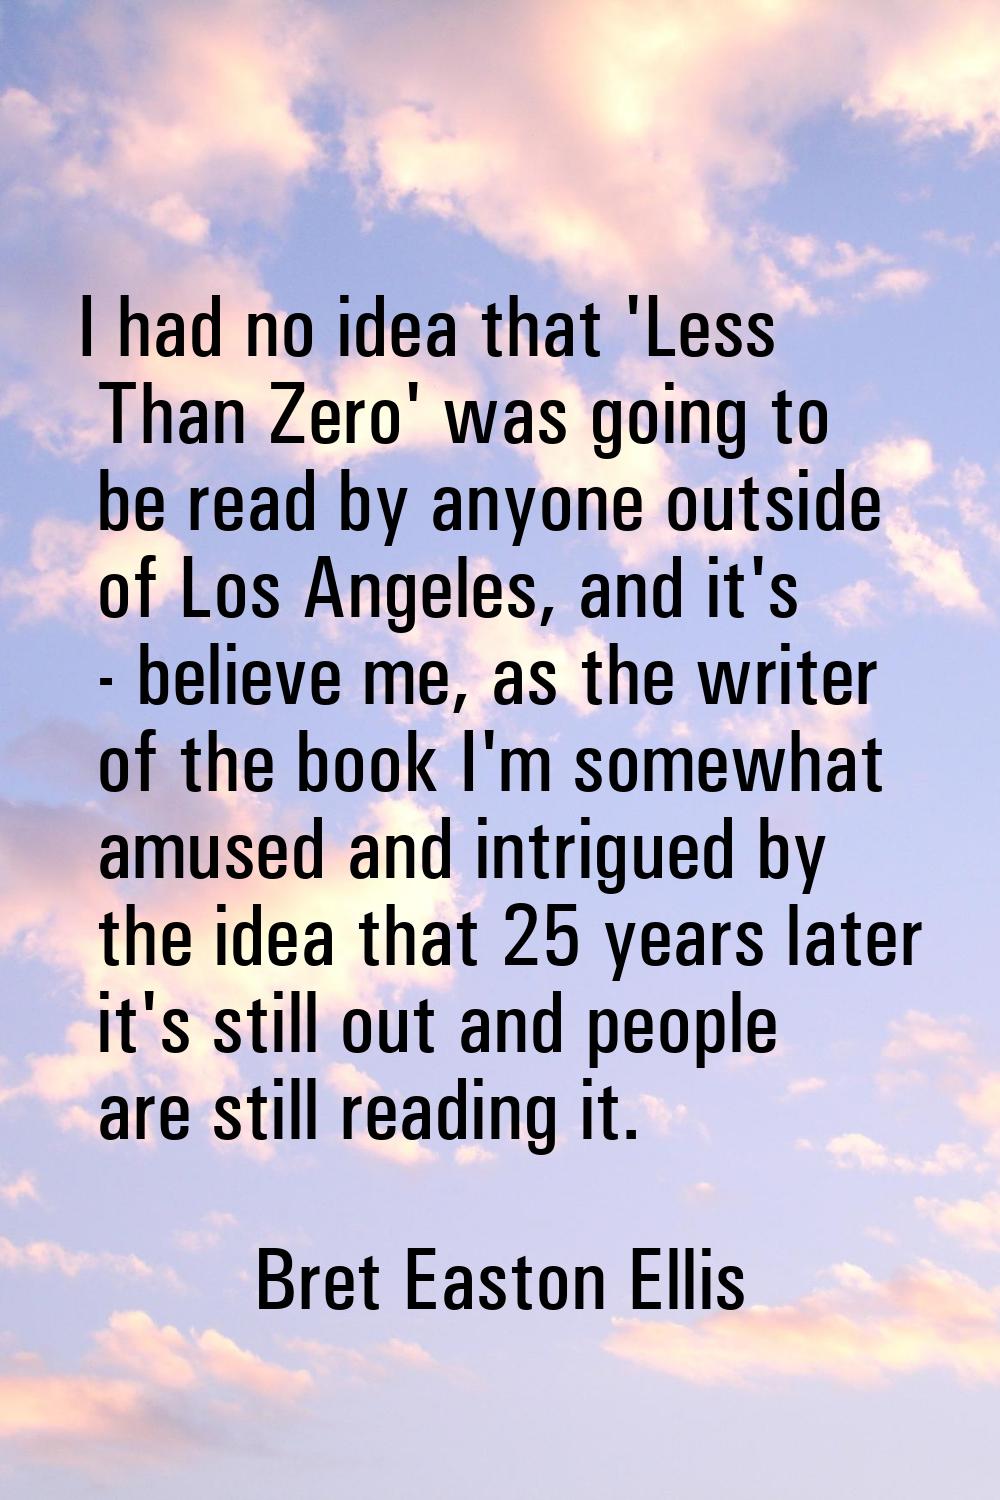 I had no idea that 'Less Than Zero' was going to be read by anyone outside of Los Angeles, and it's